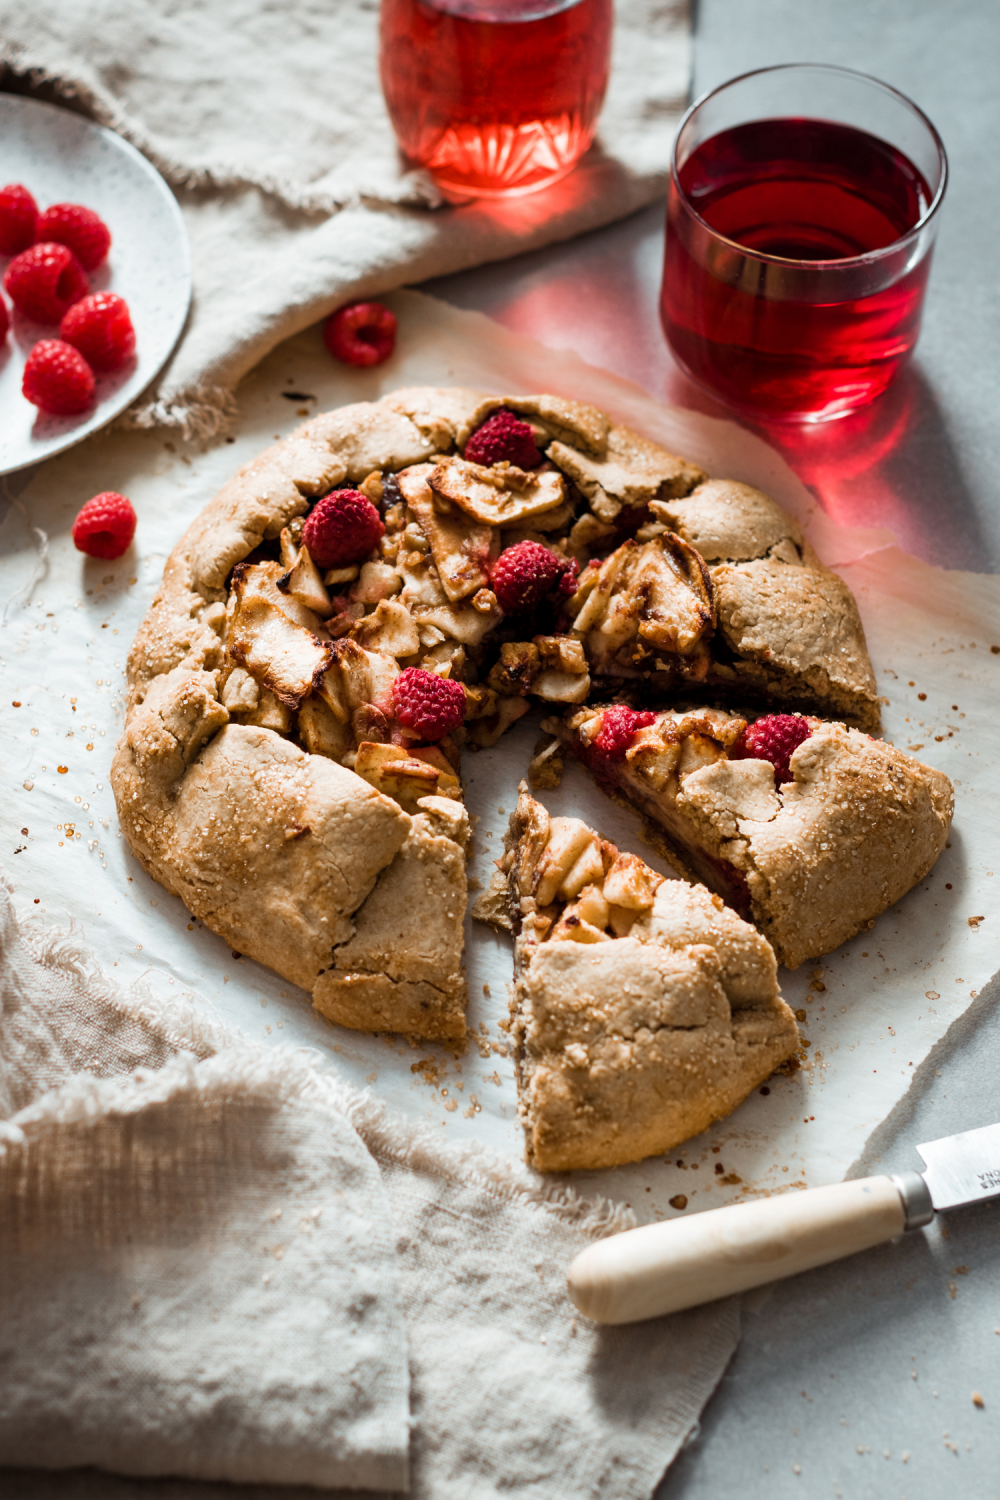 Raspberry and apple galette